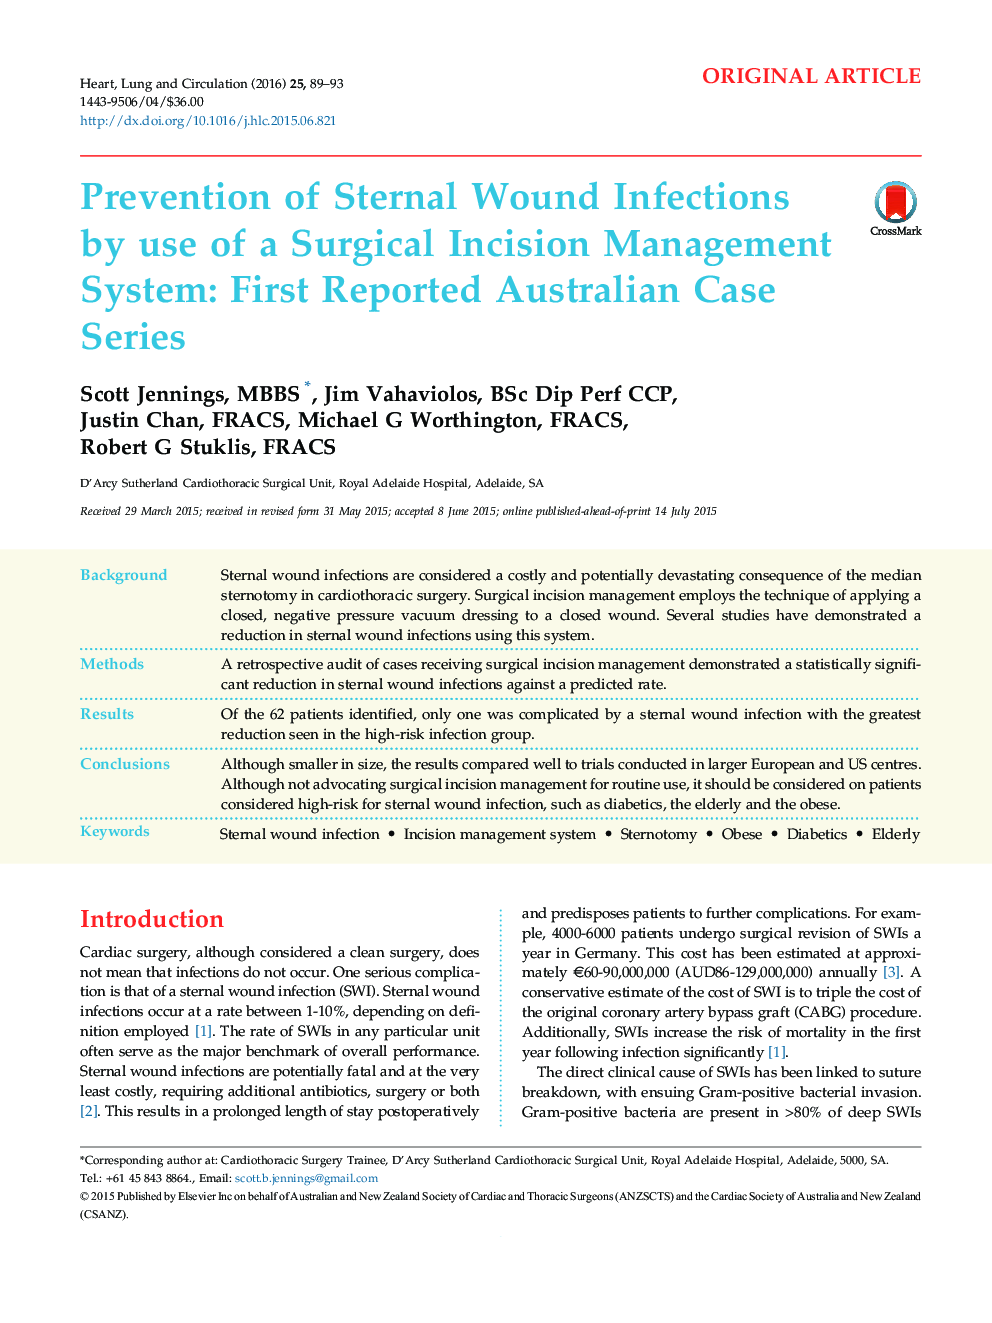 Prevention of Sternal Wound Infections by use of a Surgical Incision Management System: First Reported Australian Case Series